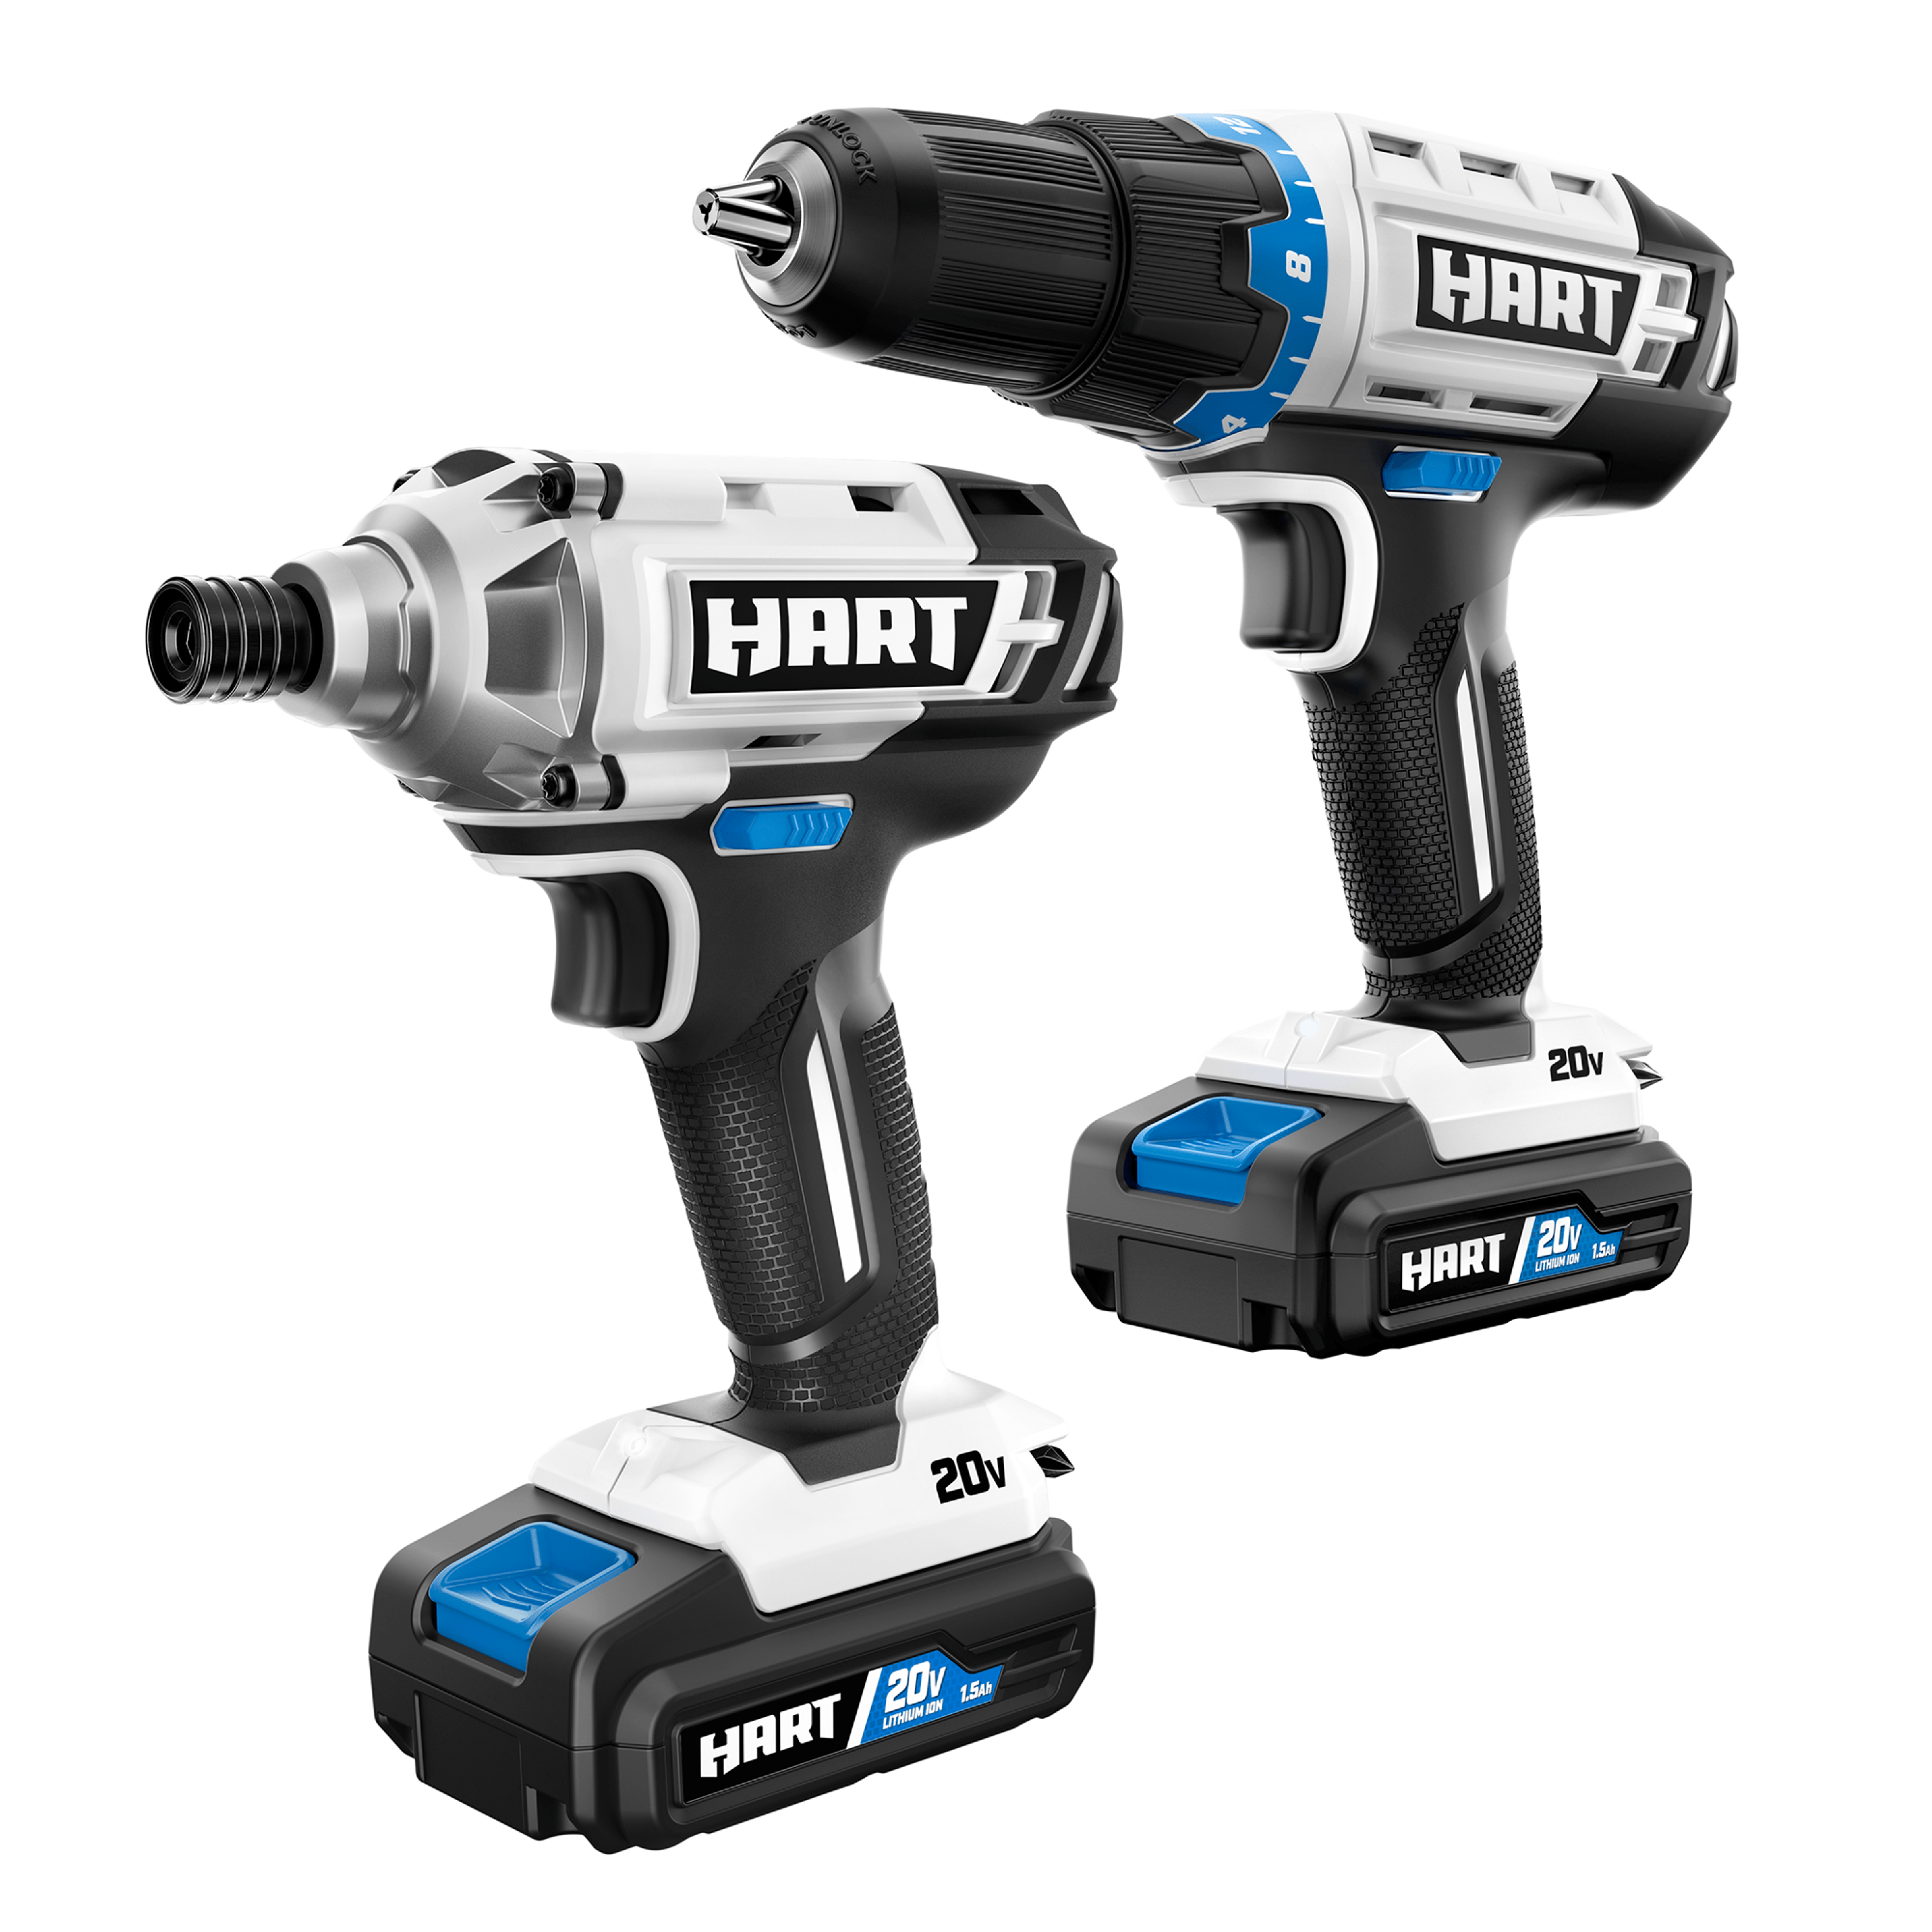 HART 20-Volt Cordless Drill and Impact Combo Kit with (2) 1.5Ah Lithium-Ion Batteries and Charger - image 1 of 11